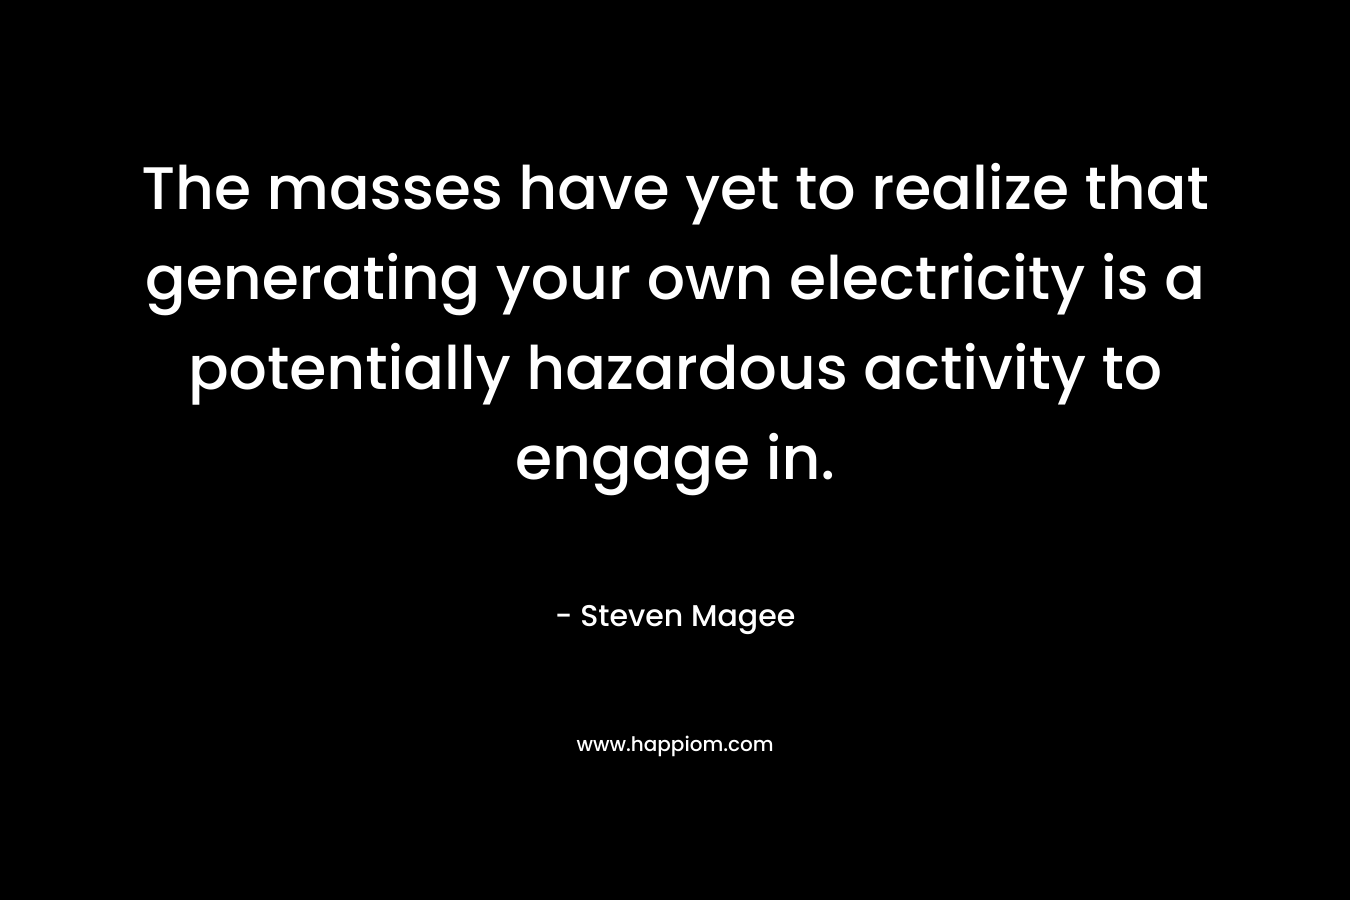 The masses have yet to realize that generating your own electricity is a potentially hazardous activity to engage in.